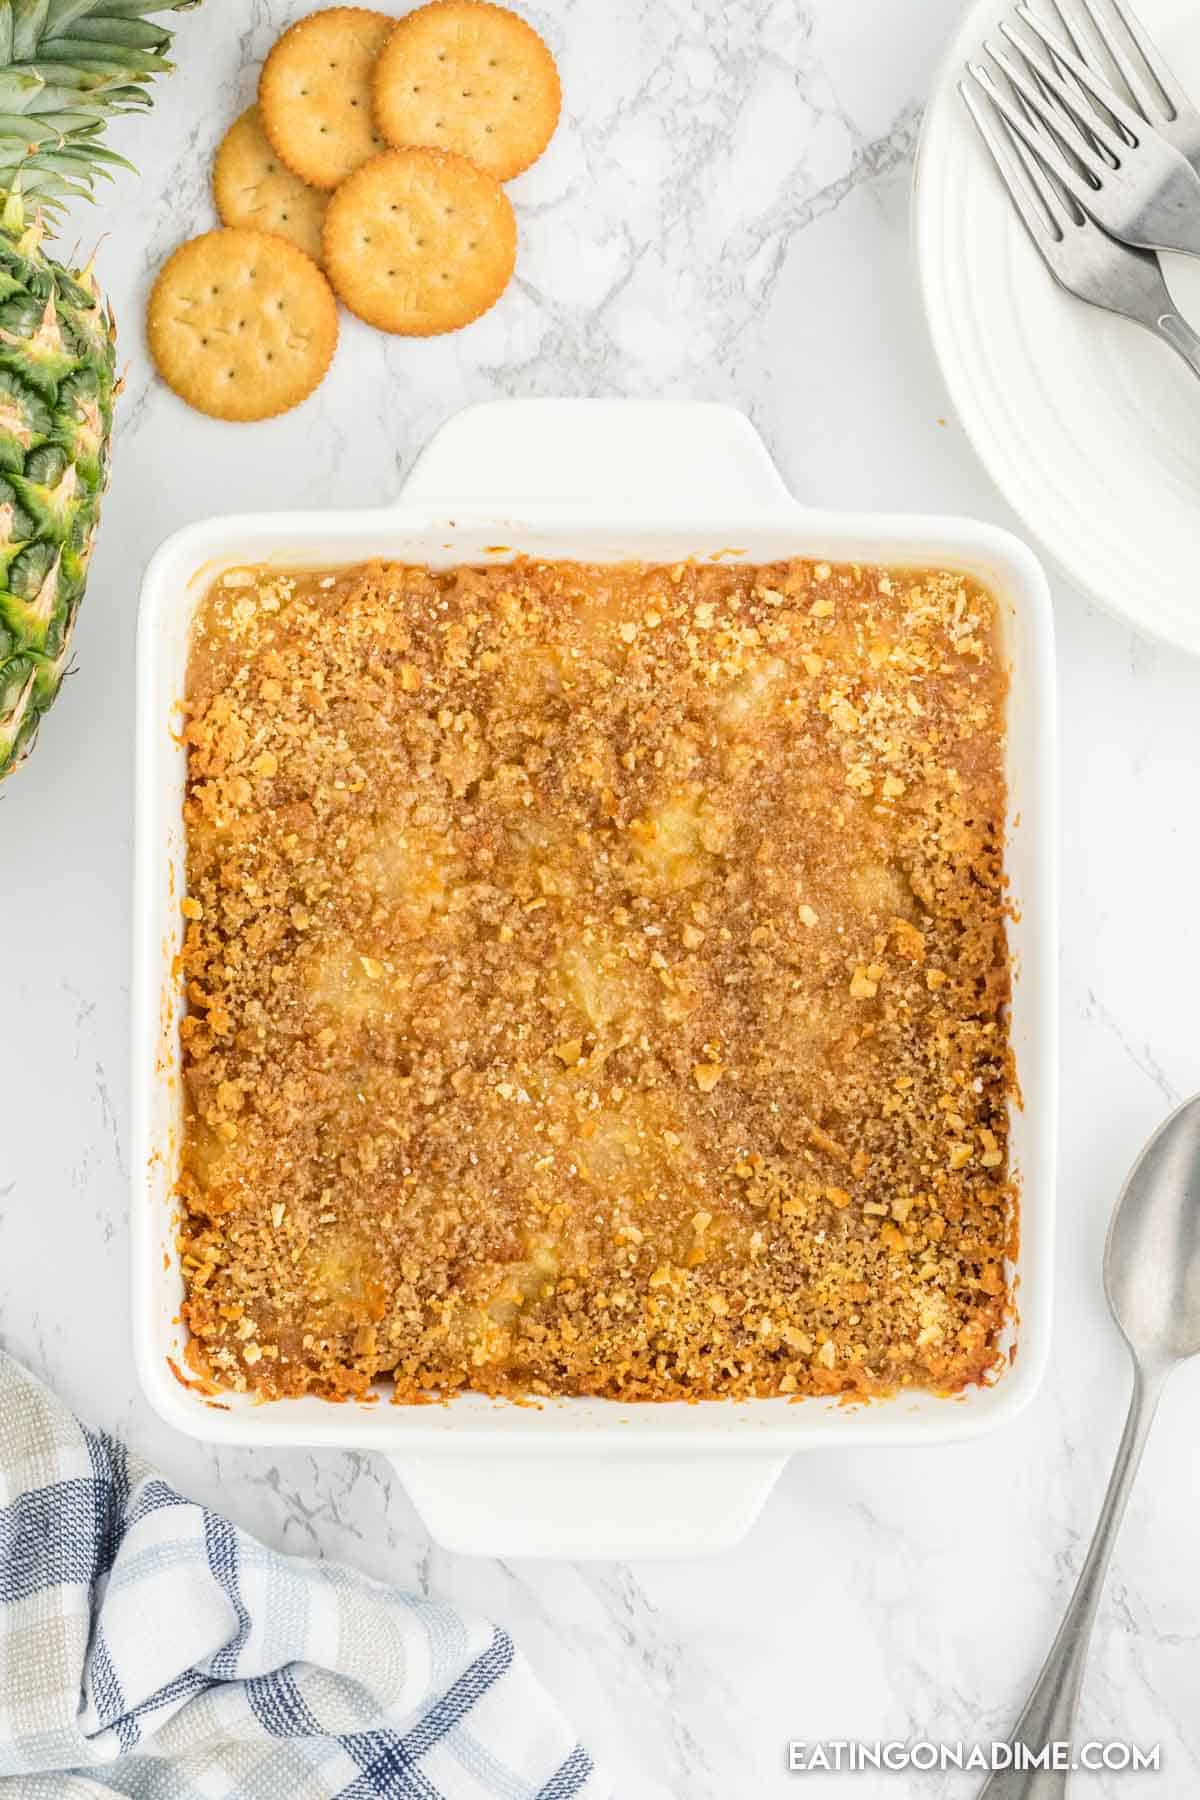 Baked pineapple casserole in a baking dish